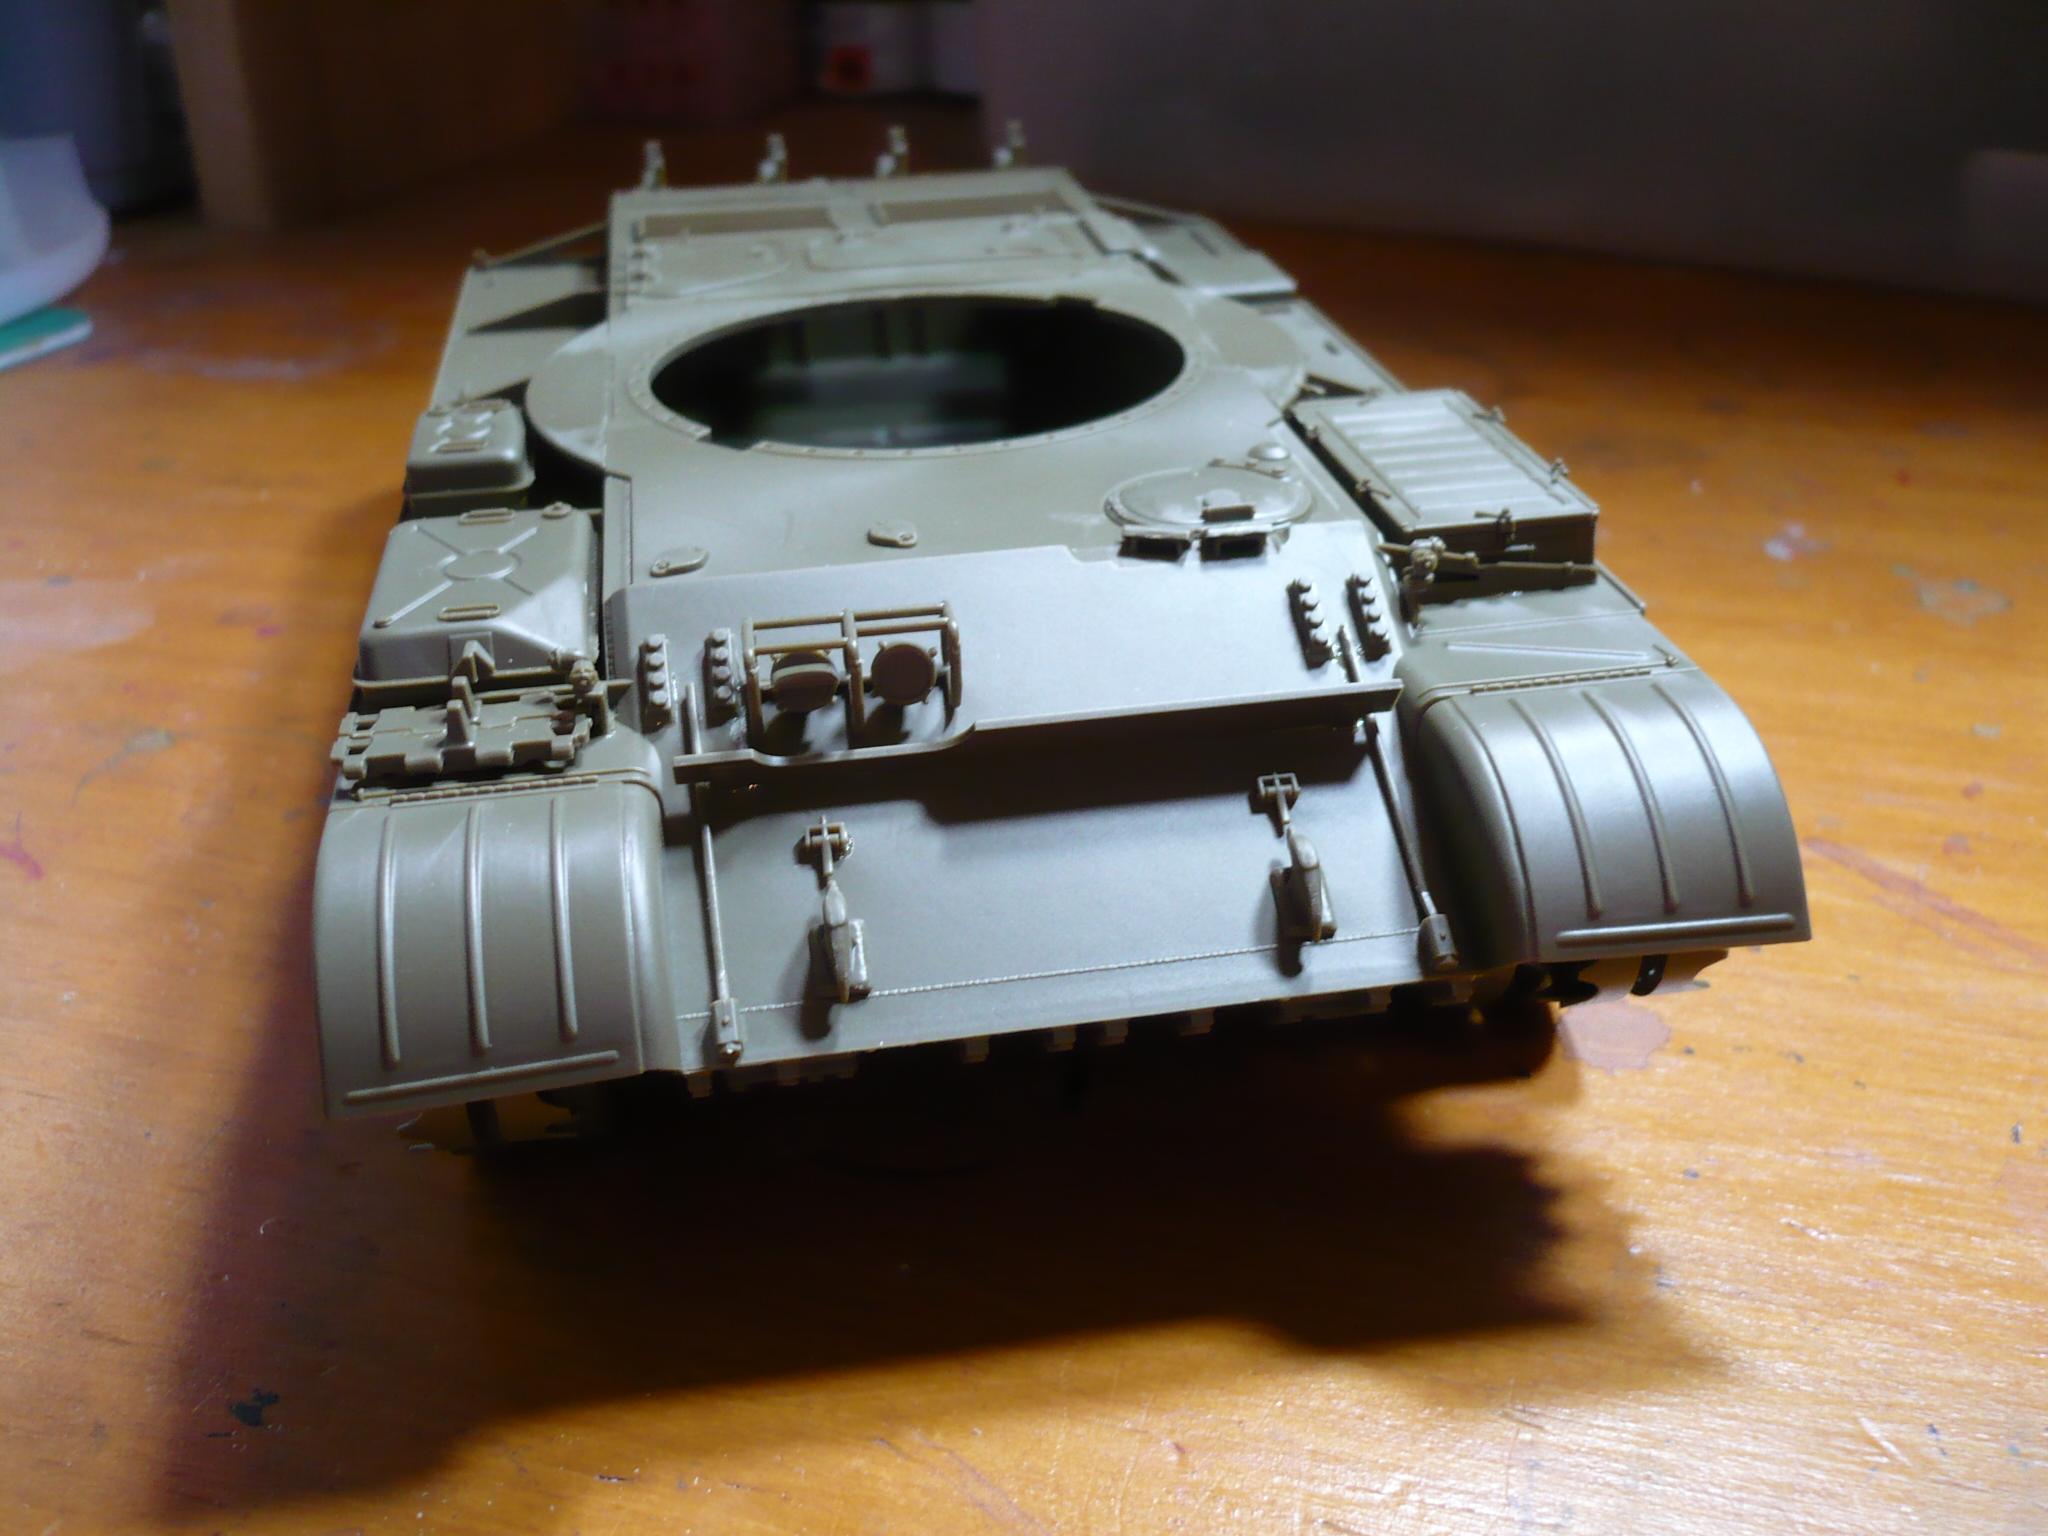 1/35, Germans, Military Modelling, Panther, Scale Modelling, T-55, Tiger